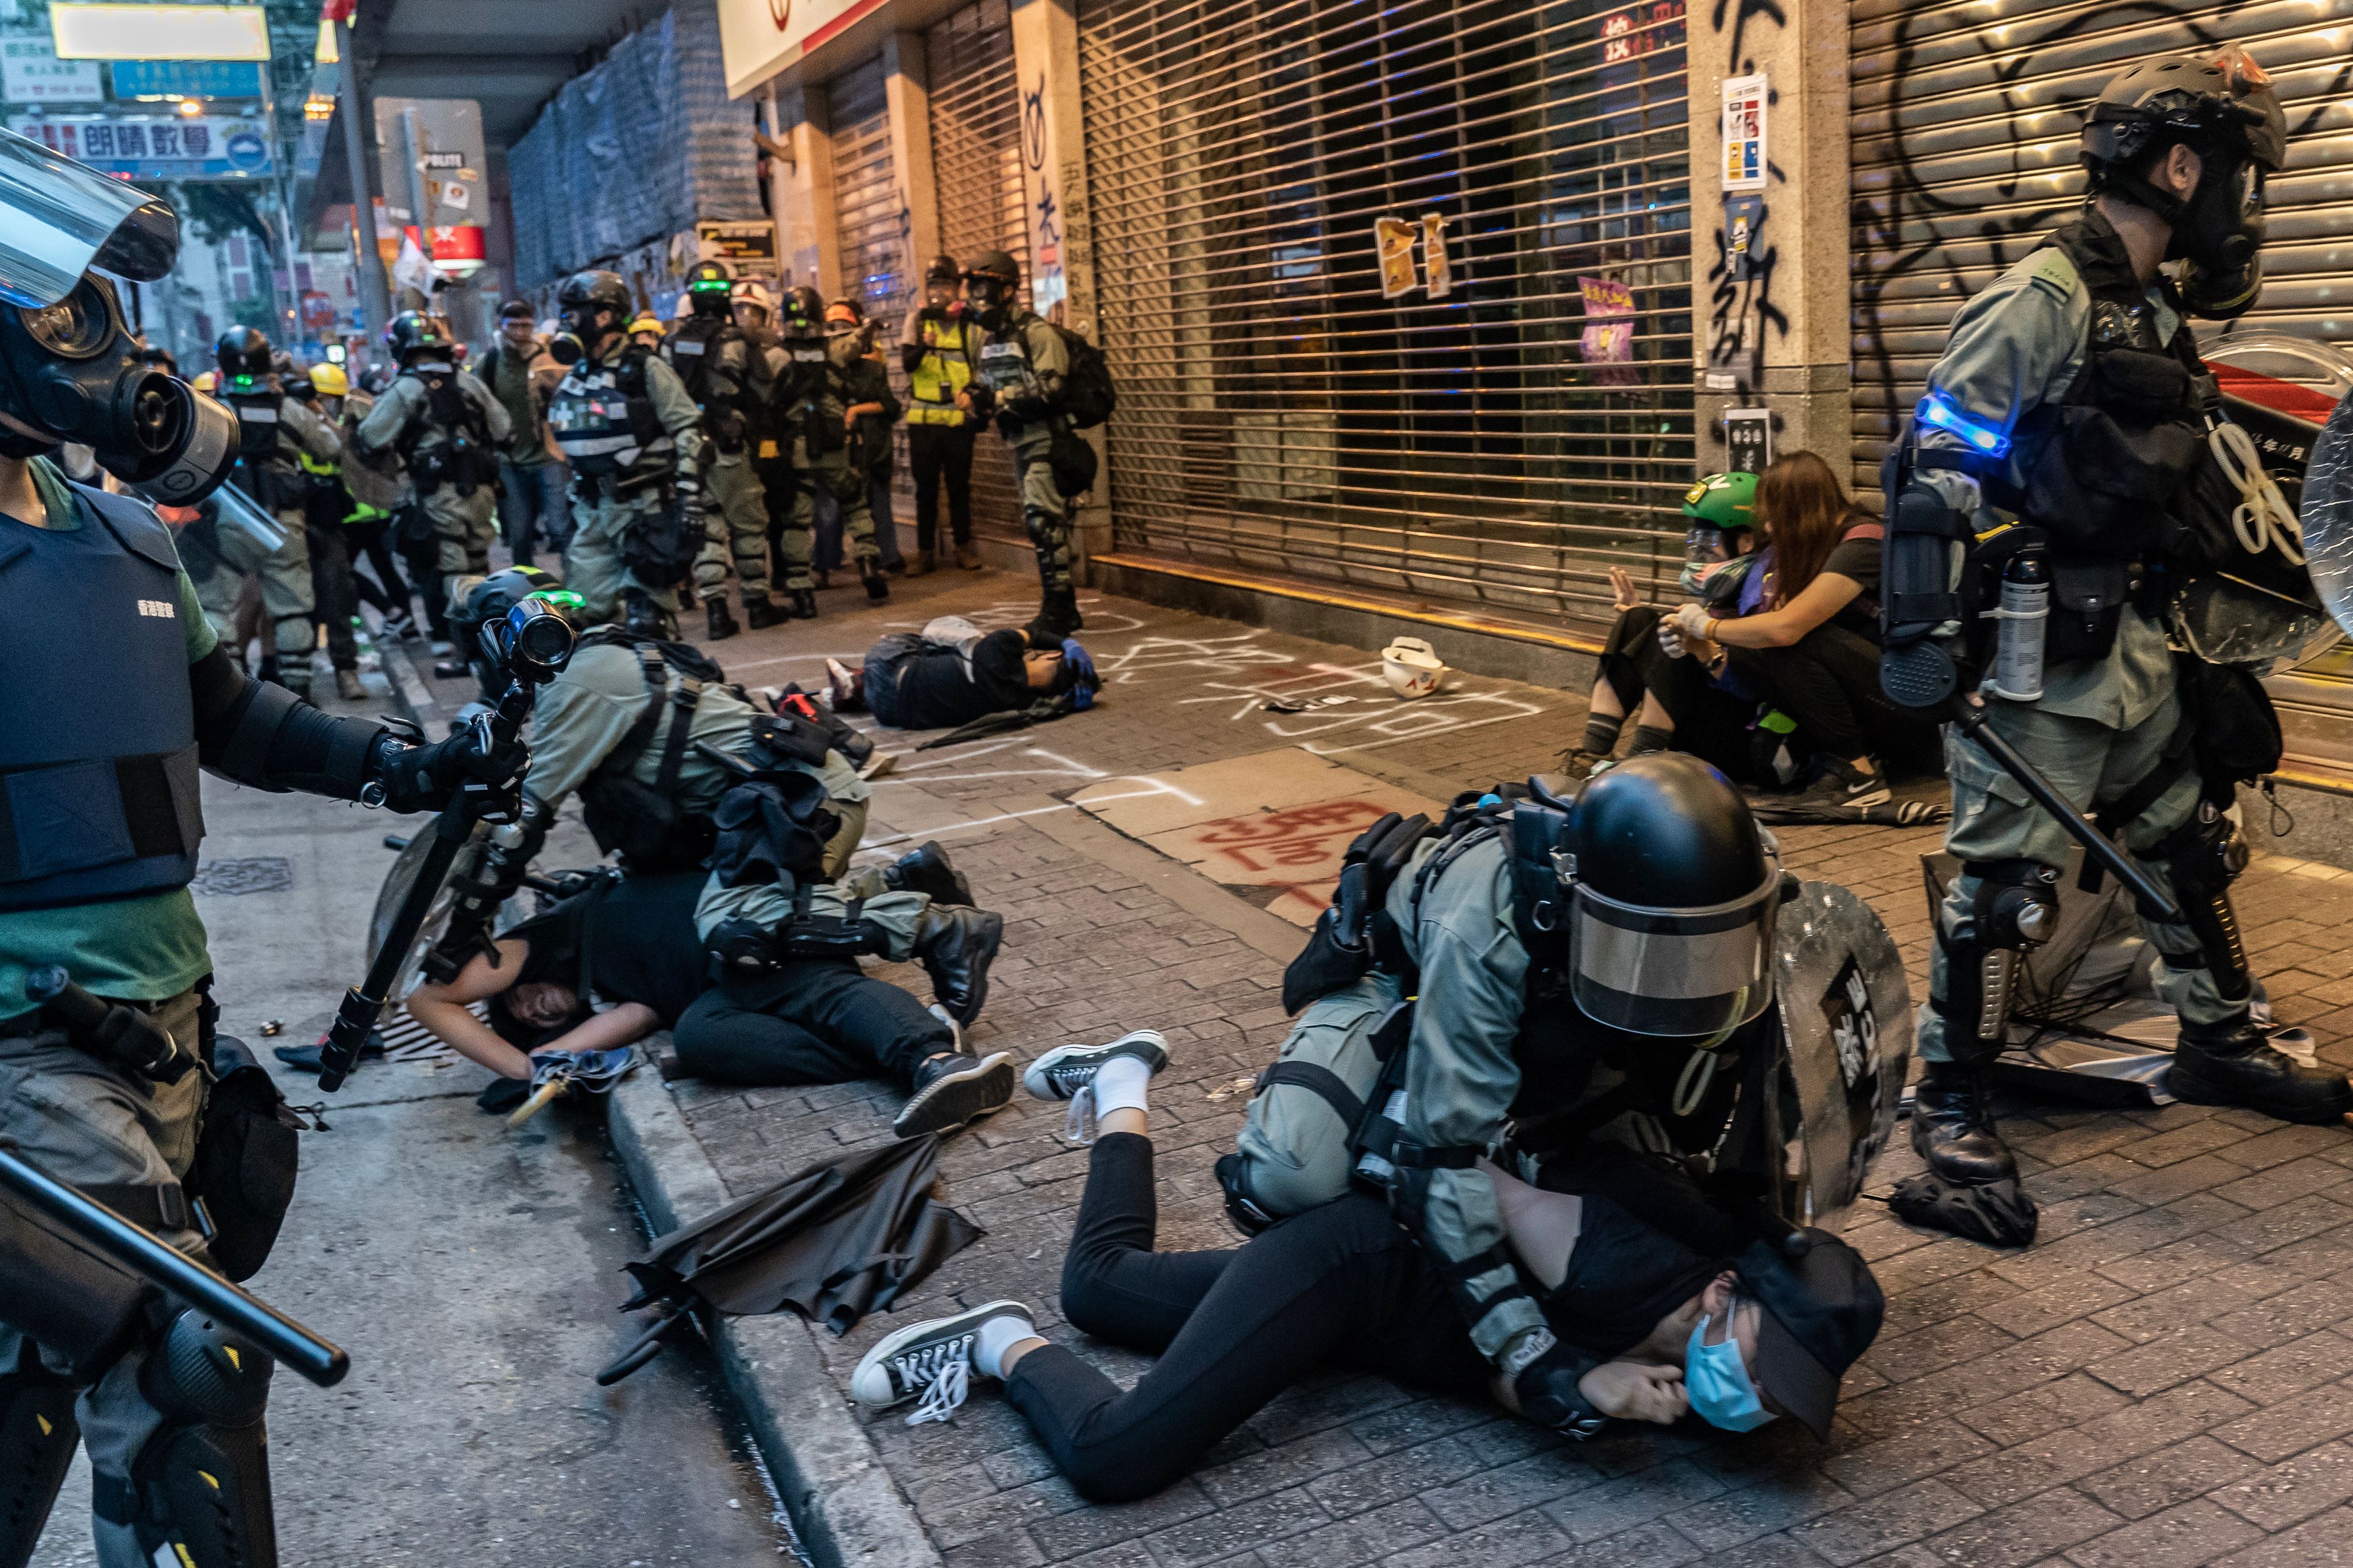 Pro-democracy protesters are arrested by police during a clash at a demonstration in Wan Chai district